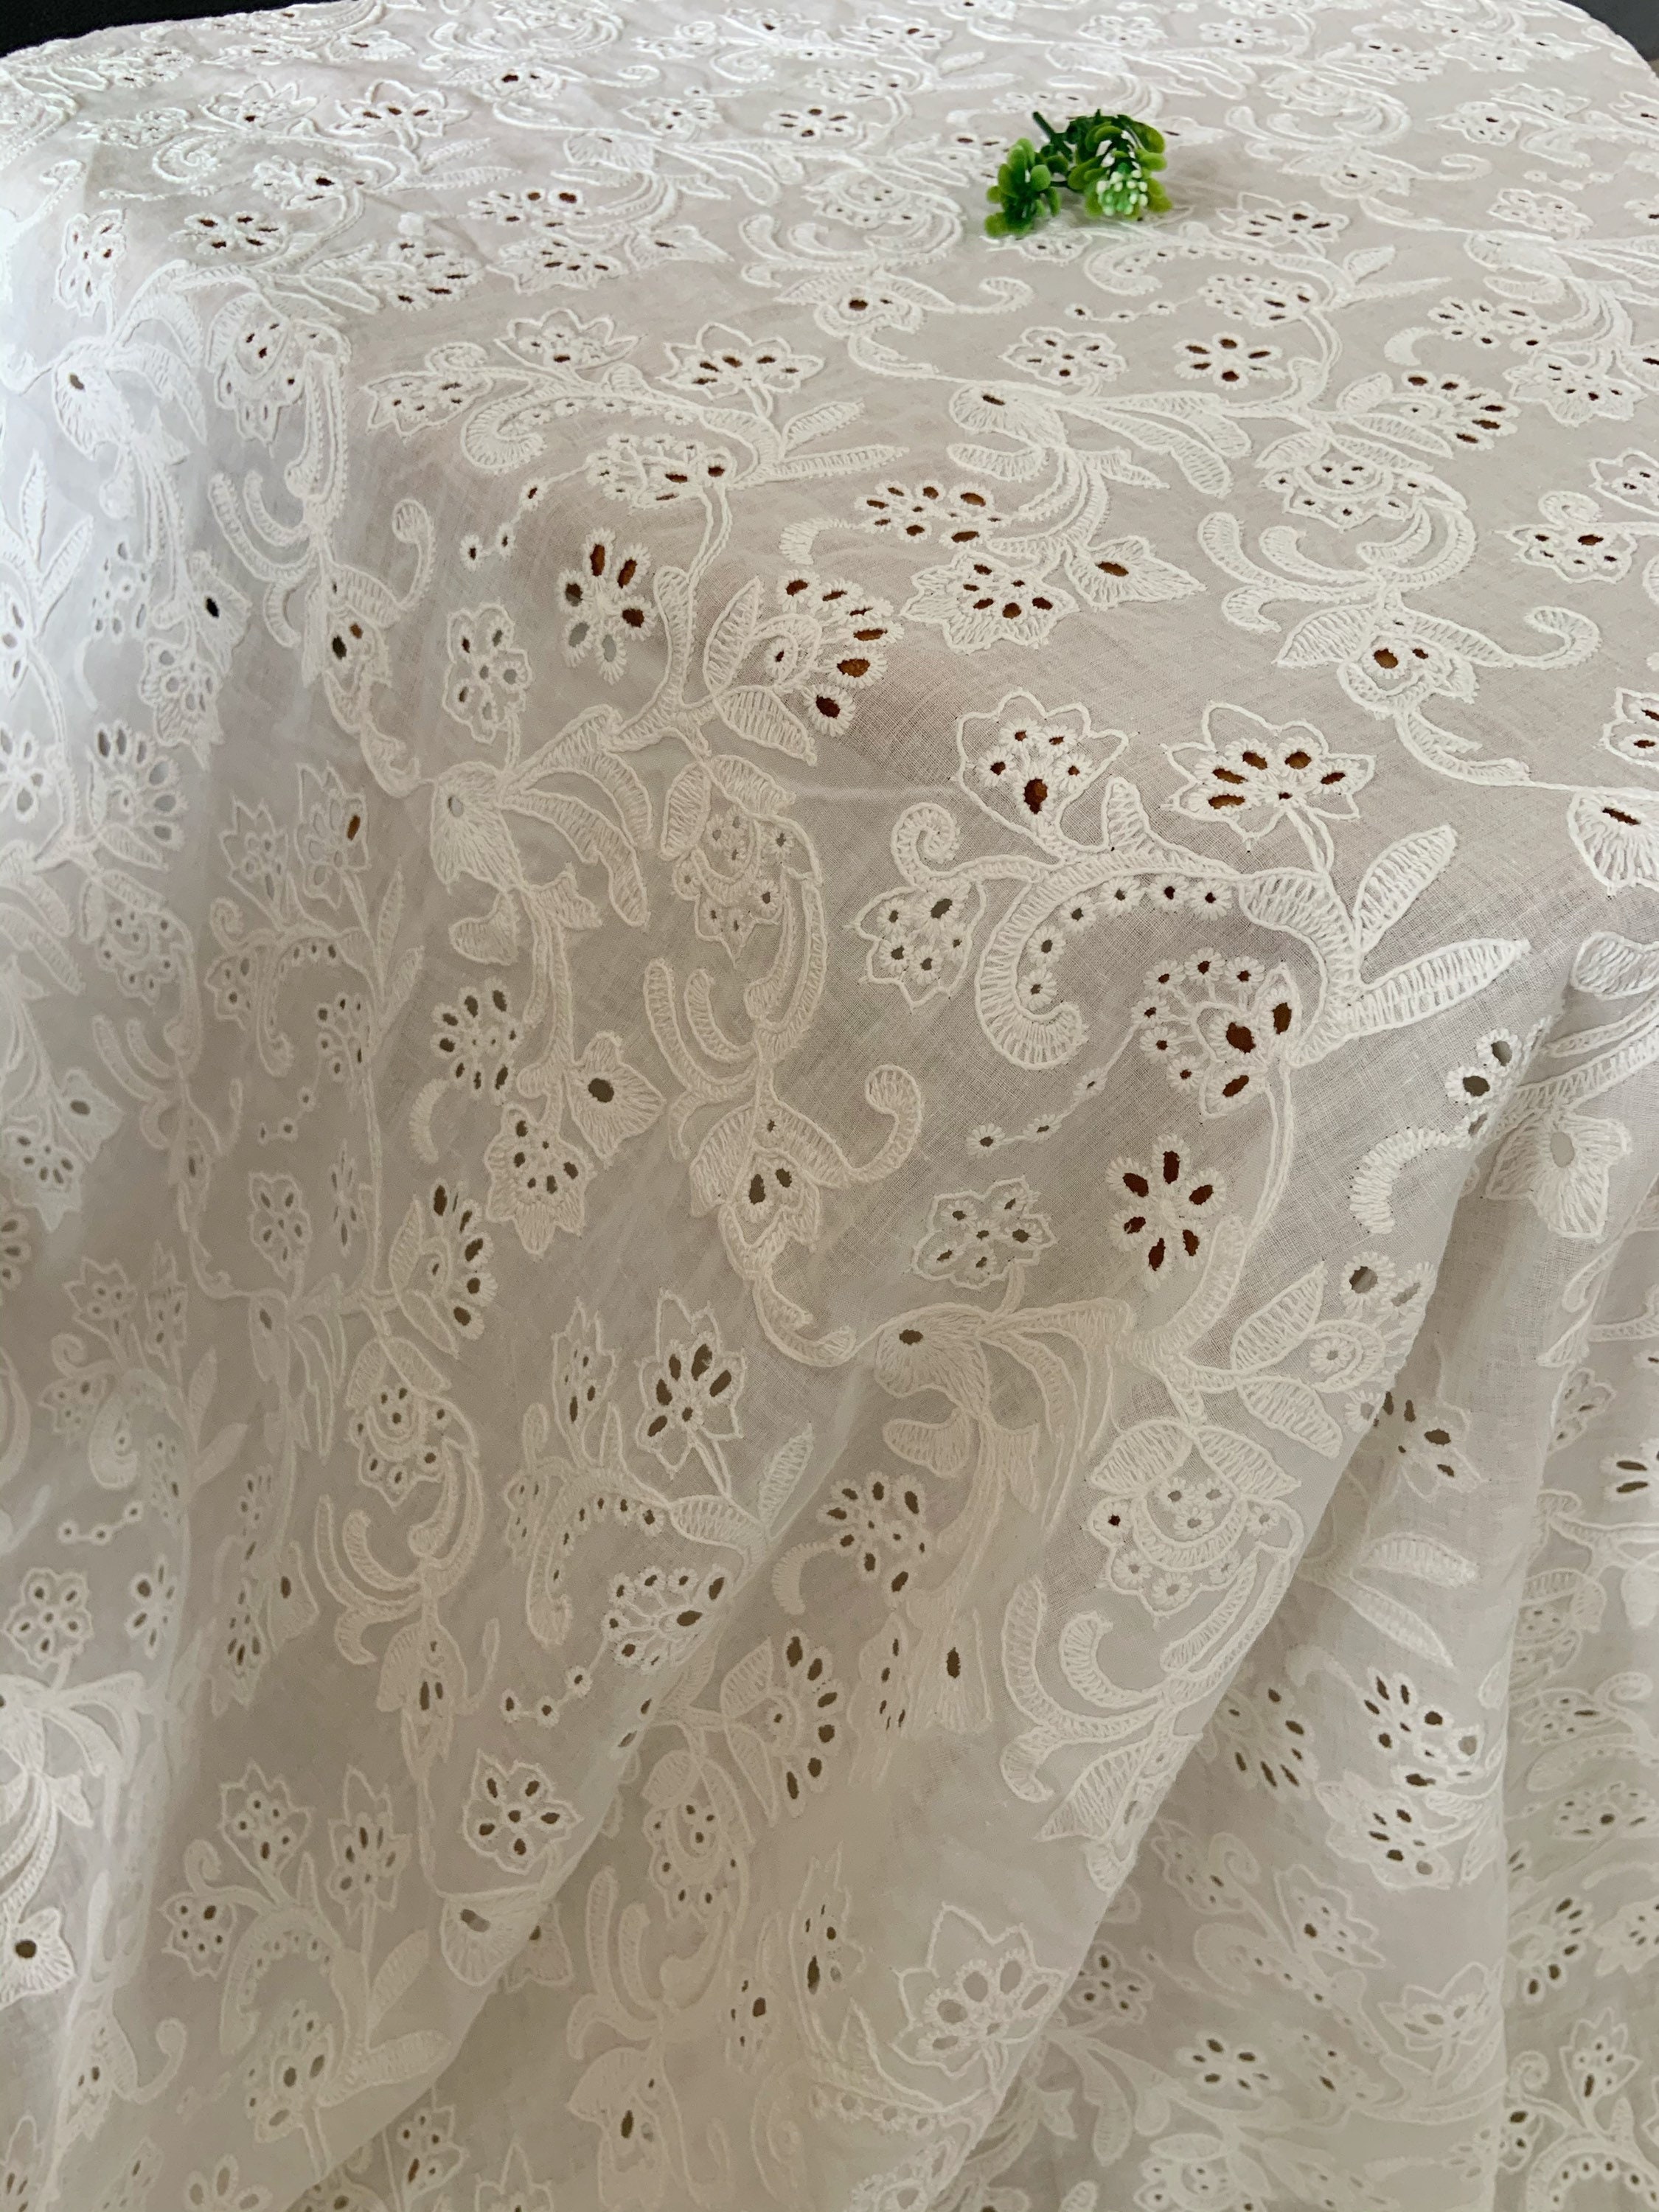 VU100 Scalloped Eyelet Lace Trim White, 4 inch Wide 2 Yard Cotton Lace Trim Fabric by The Yard, for Sewing Crafts Dress Tablcloth Blankets